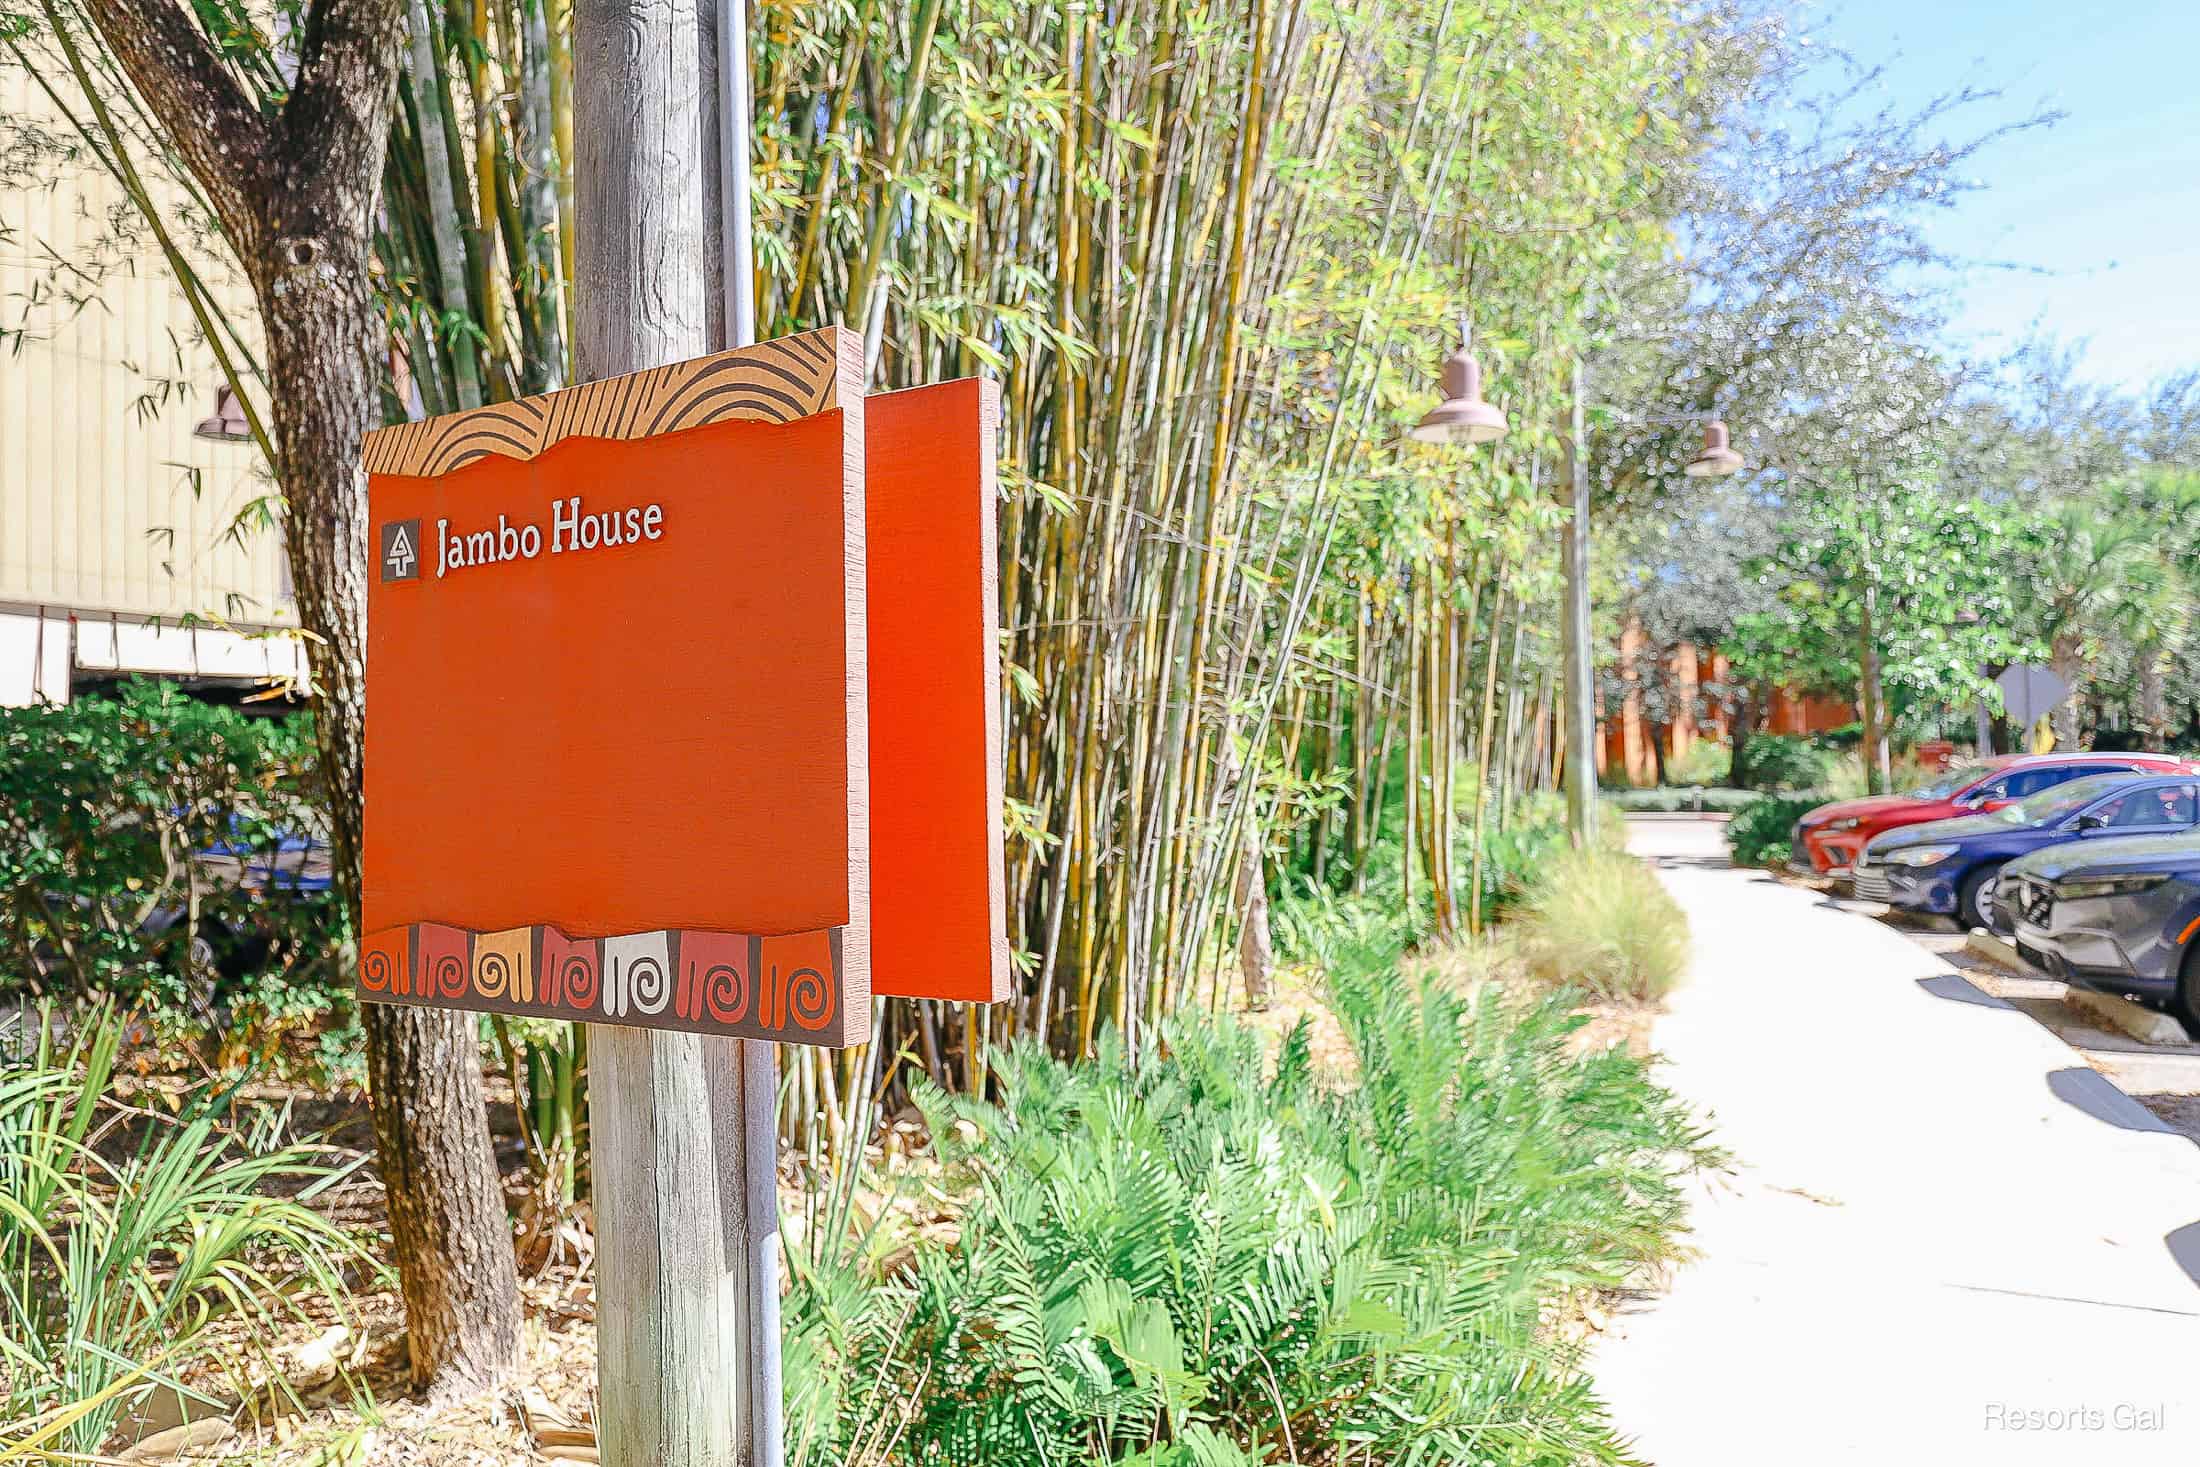 a sign that shows guests to continue straight to reach Jambo House 